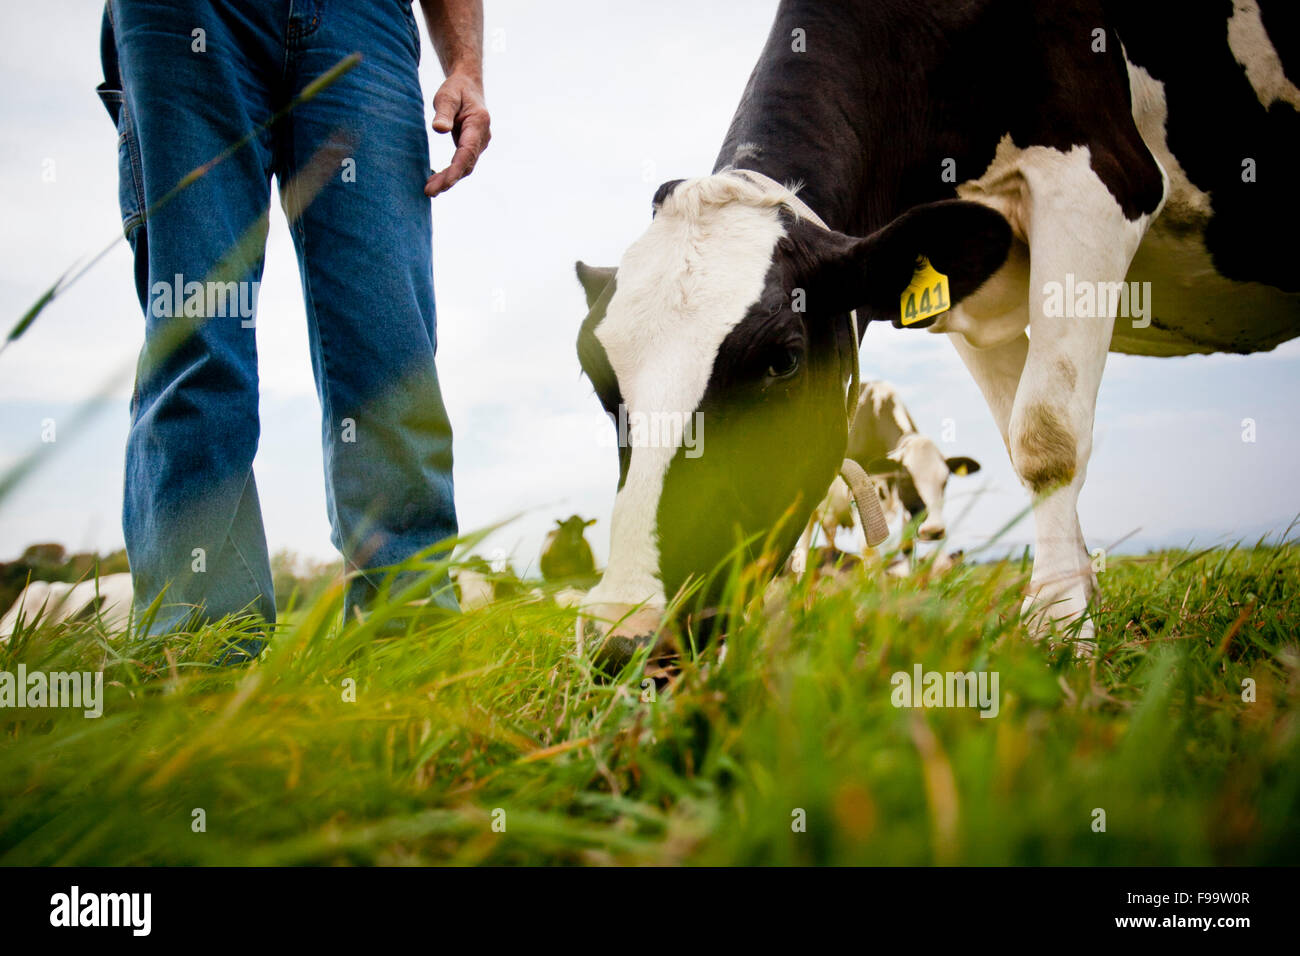 Grass fed cow and farmer. Stock Photo